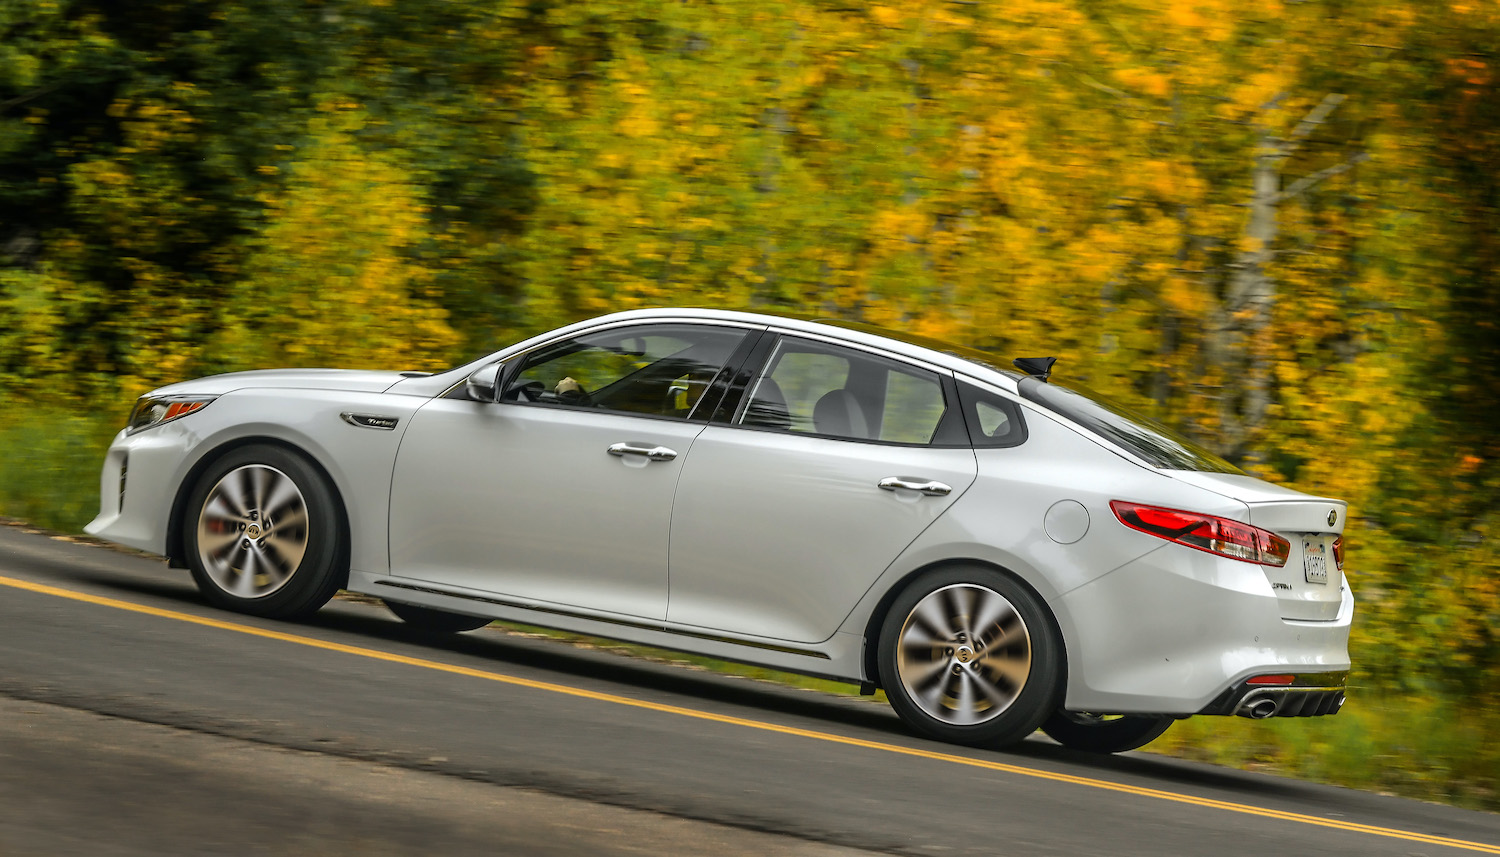 The 2018 Kia Optima is an Underrated Used Car